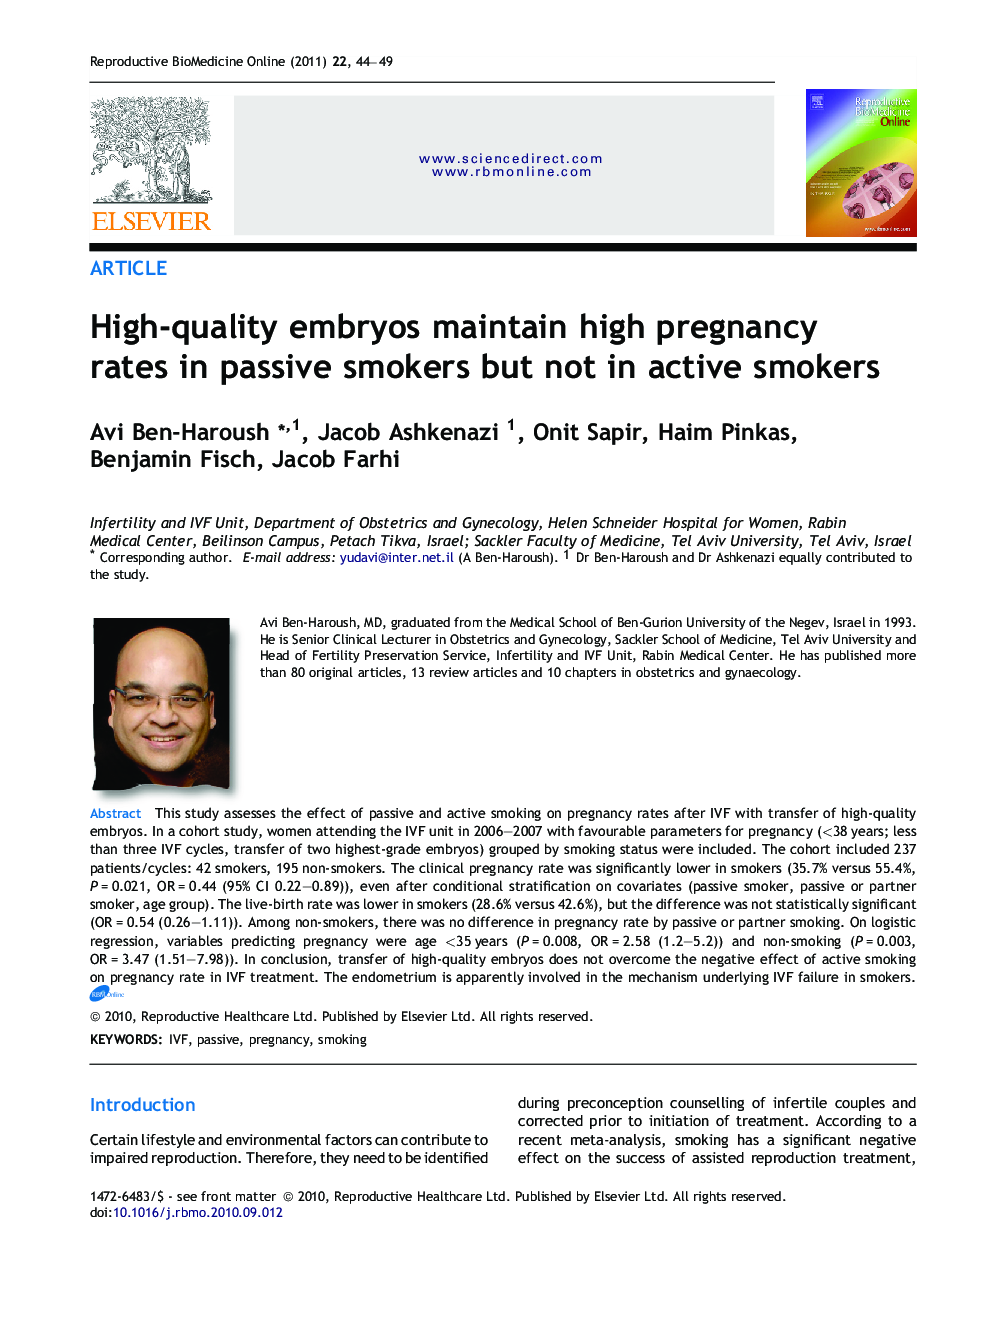 High-quality embryos maintain high pregnancy rates in passive smokers but not in active smokers 